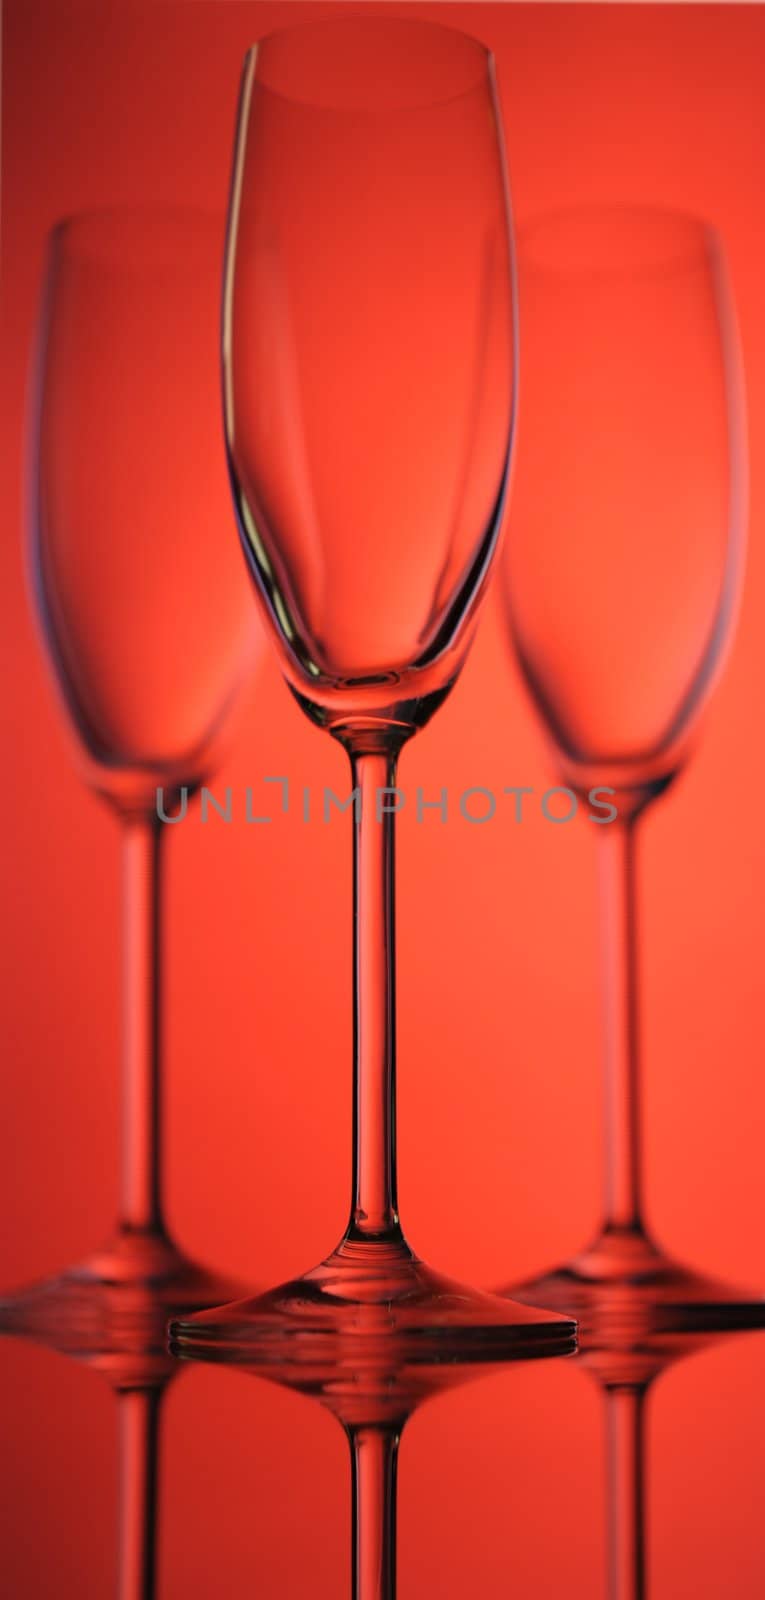 Tree Elegant Tall Wineglass For Champagne  Over Red  Background.